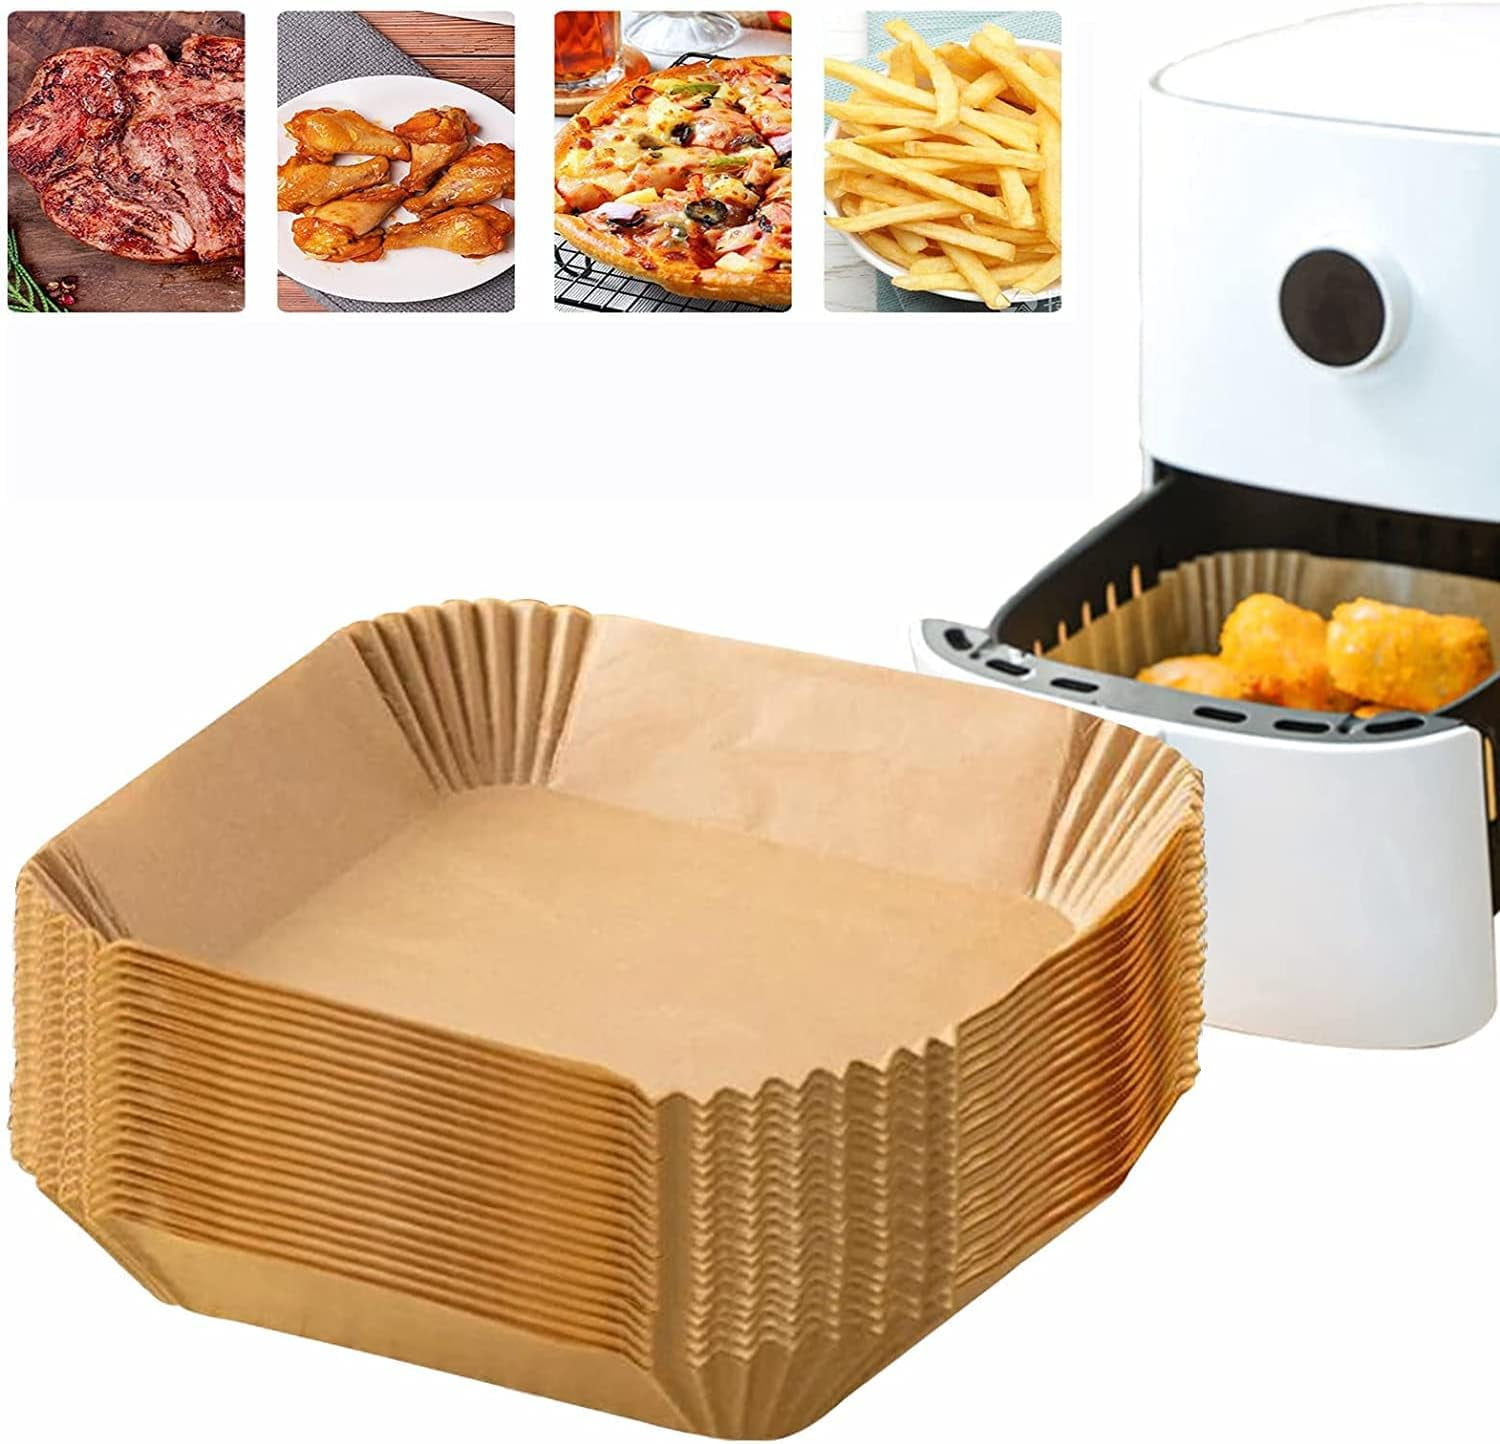 HomLux 100 Pcs Air Fryer Disposable Paper Liner, 8 Inch Non-Stick Air Fryer  Liners Round, Parchment Paper For Baking, Cooking, Frying, Roasting, And  Microwave, Oil-Proof, Water-Proof